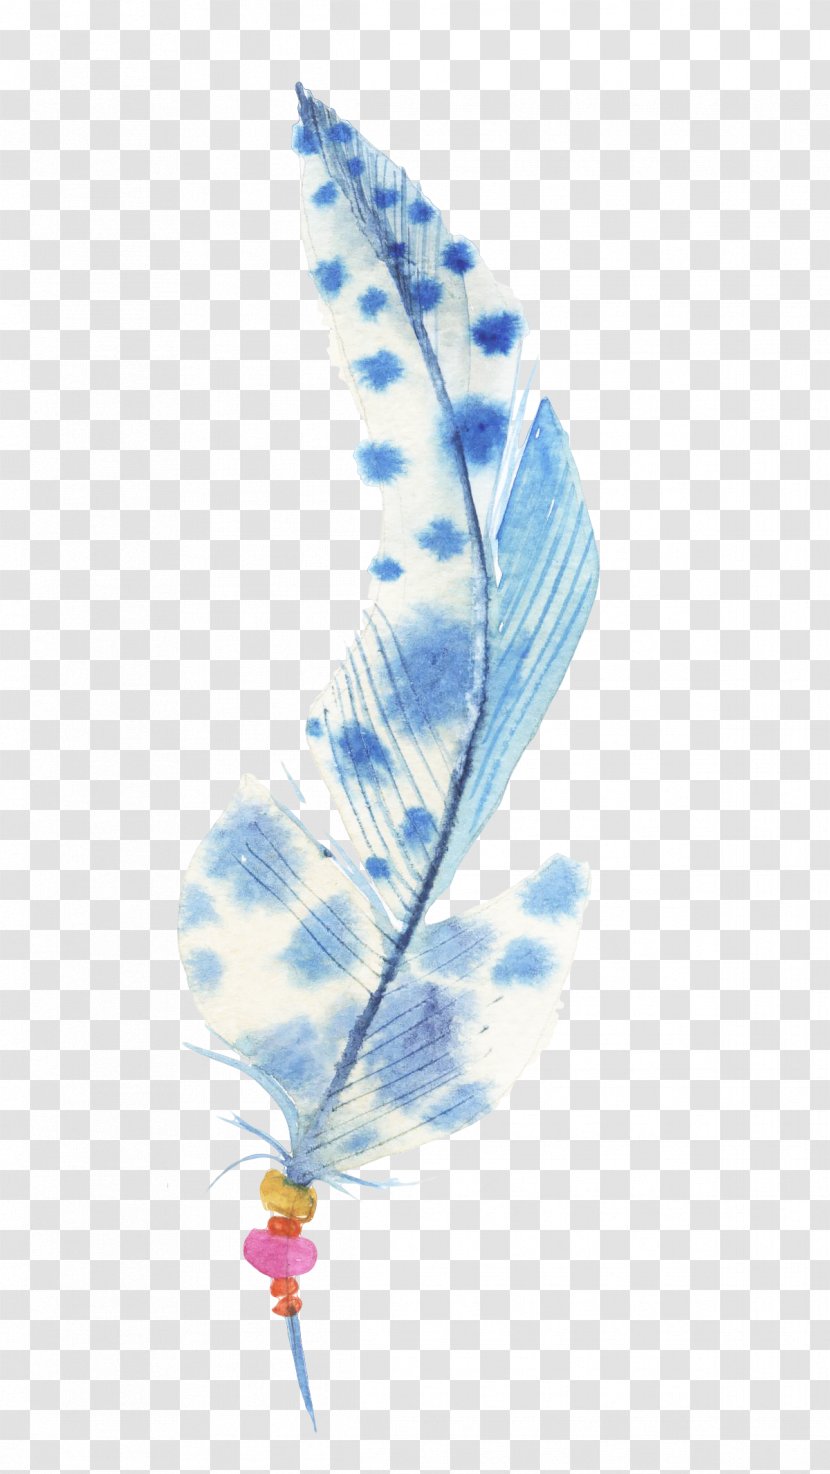 Feather - Vertebrate - Hand-painted Feathers Transparent PNG